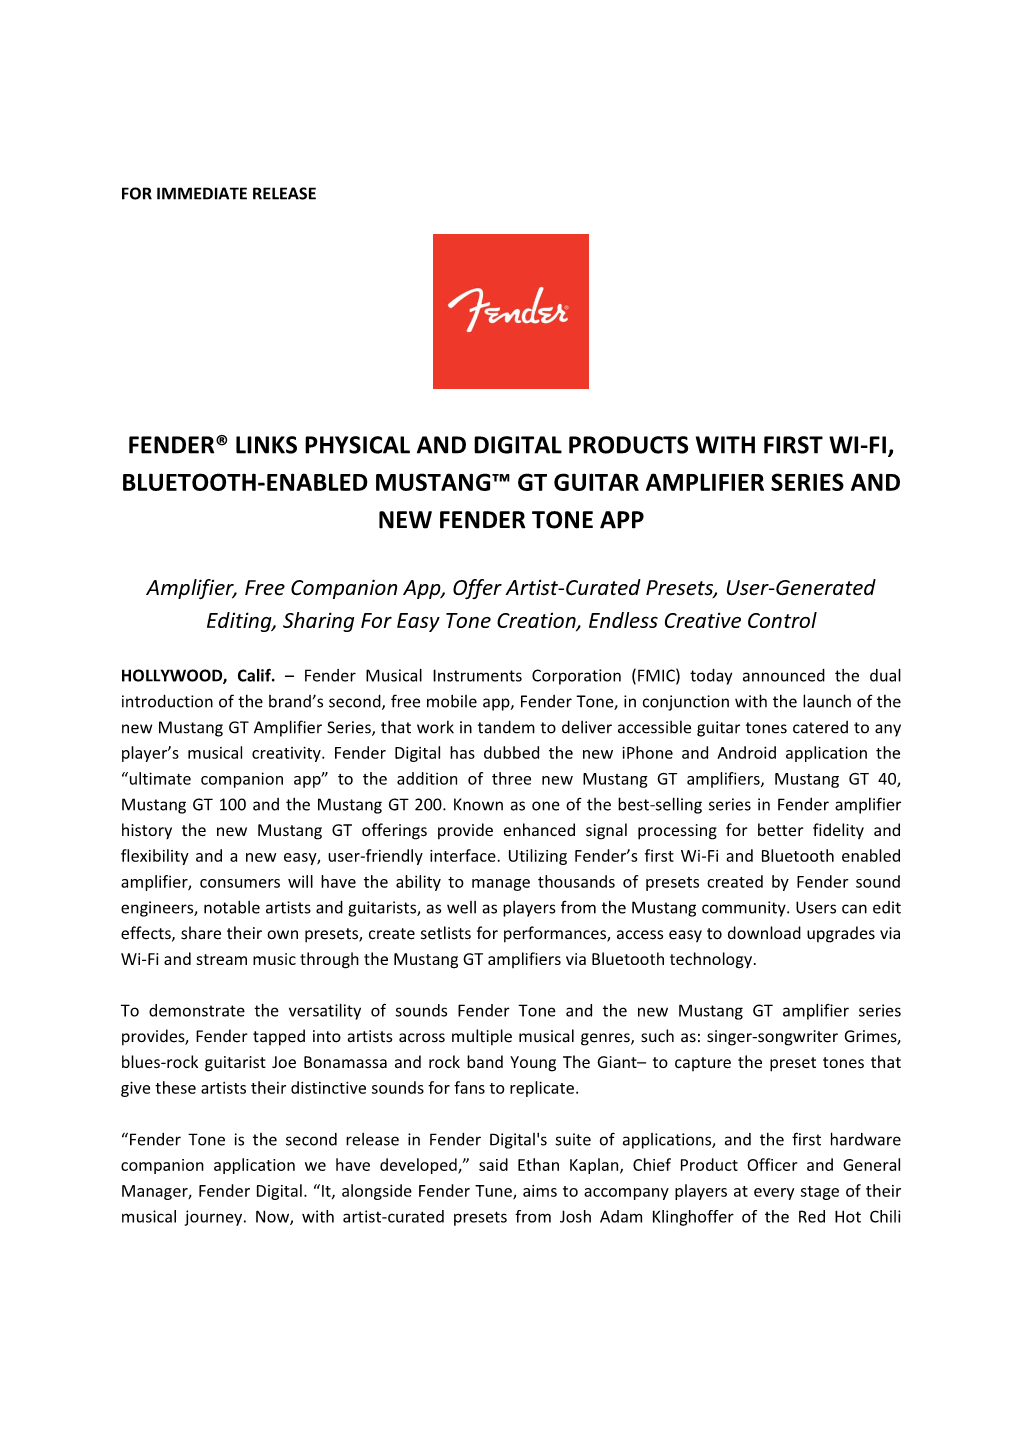 Fender® Links Physical and Digital Products with First Wi-Fi, Bluetooth-Enabled Mustang™ Gt Guitar Amplifier Series and New Fender Tone App